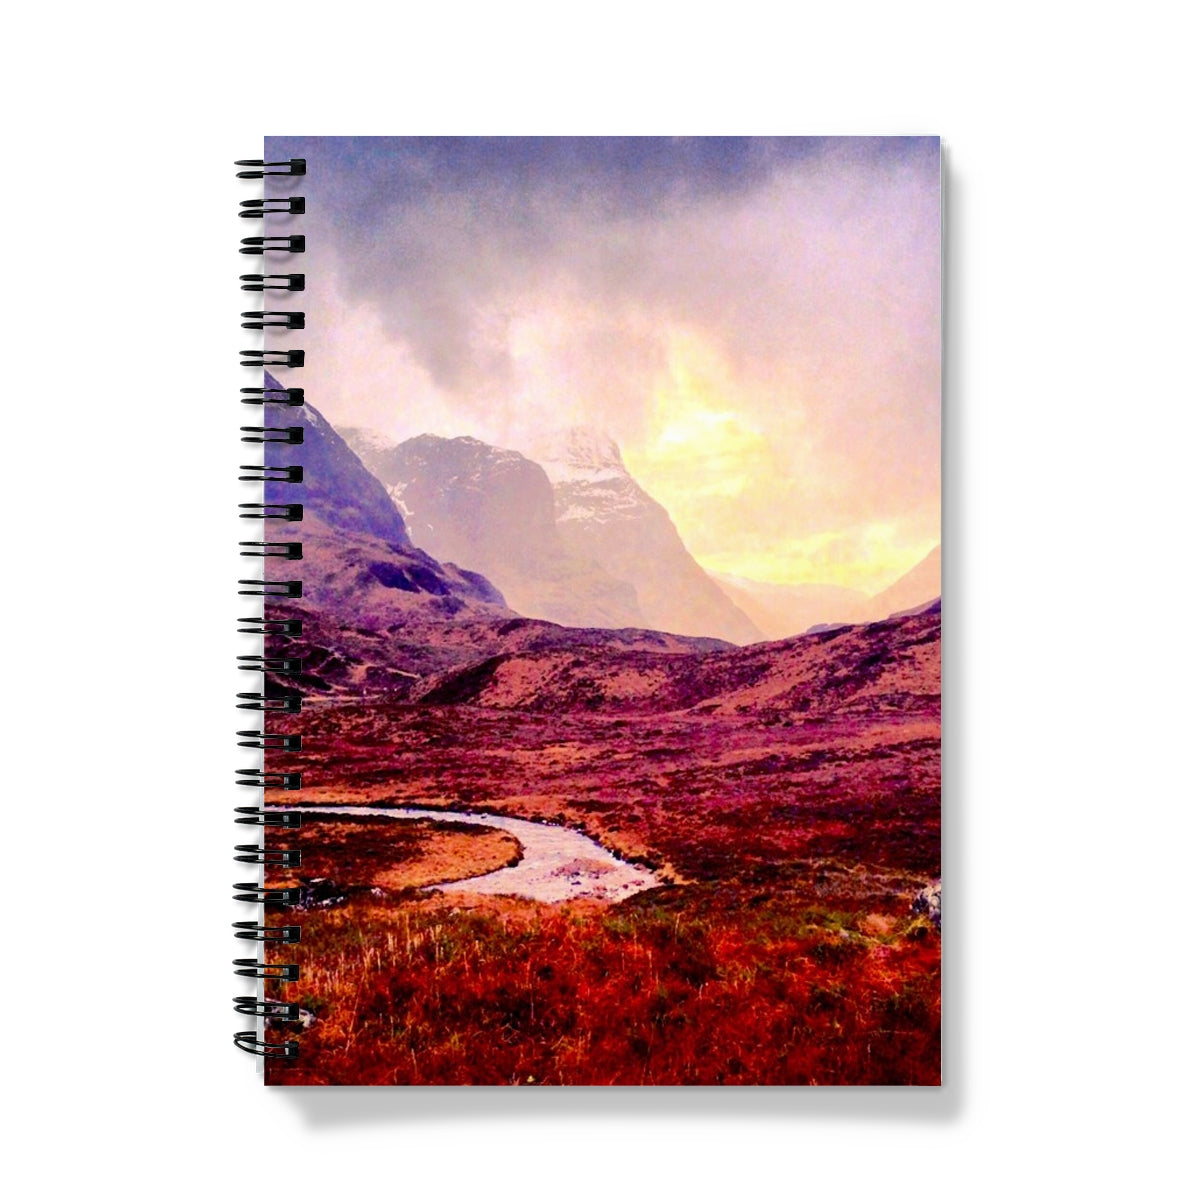 A Brooding Glencoe Art Gifts Notebook-Journals & Notebooks-Glencoe Art Gallery-A4-Lined-Paintings, Prints, Homeware, Art Gifts From Scotland By Scottish Artist Kevin Hunter